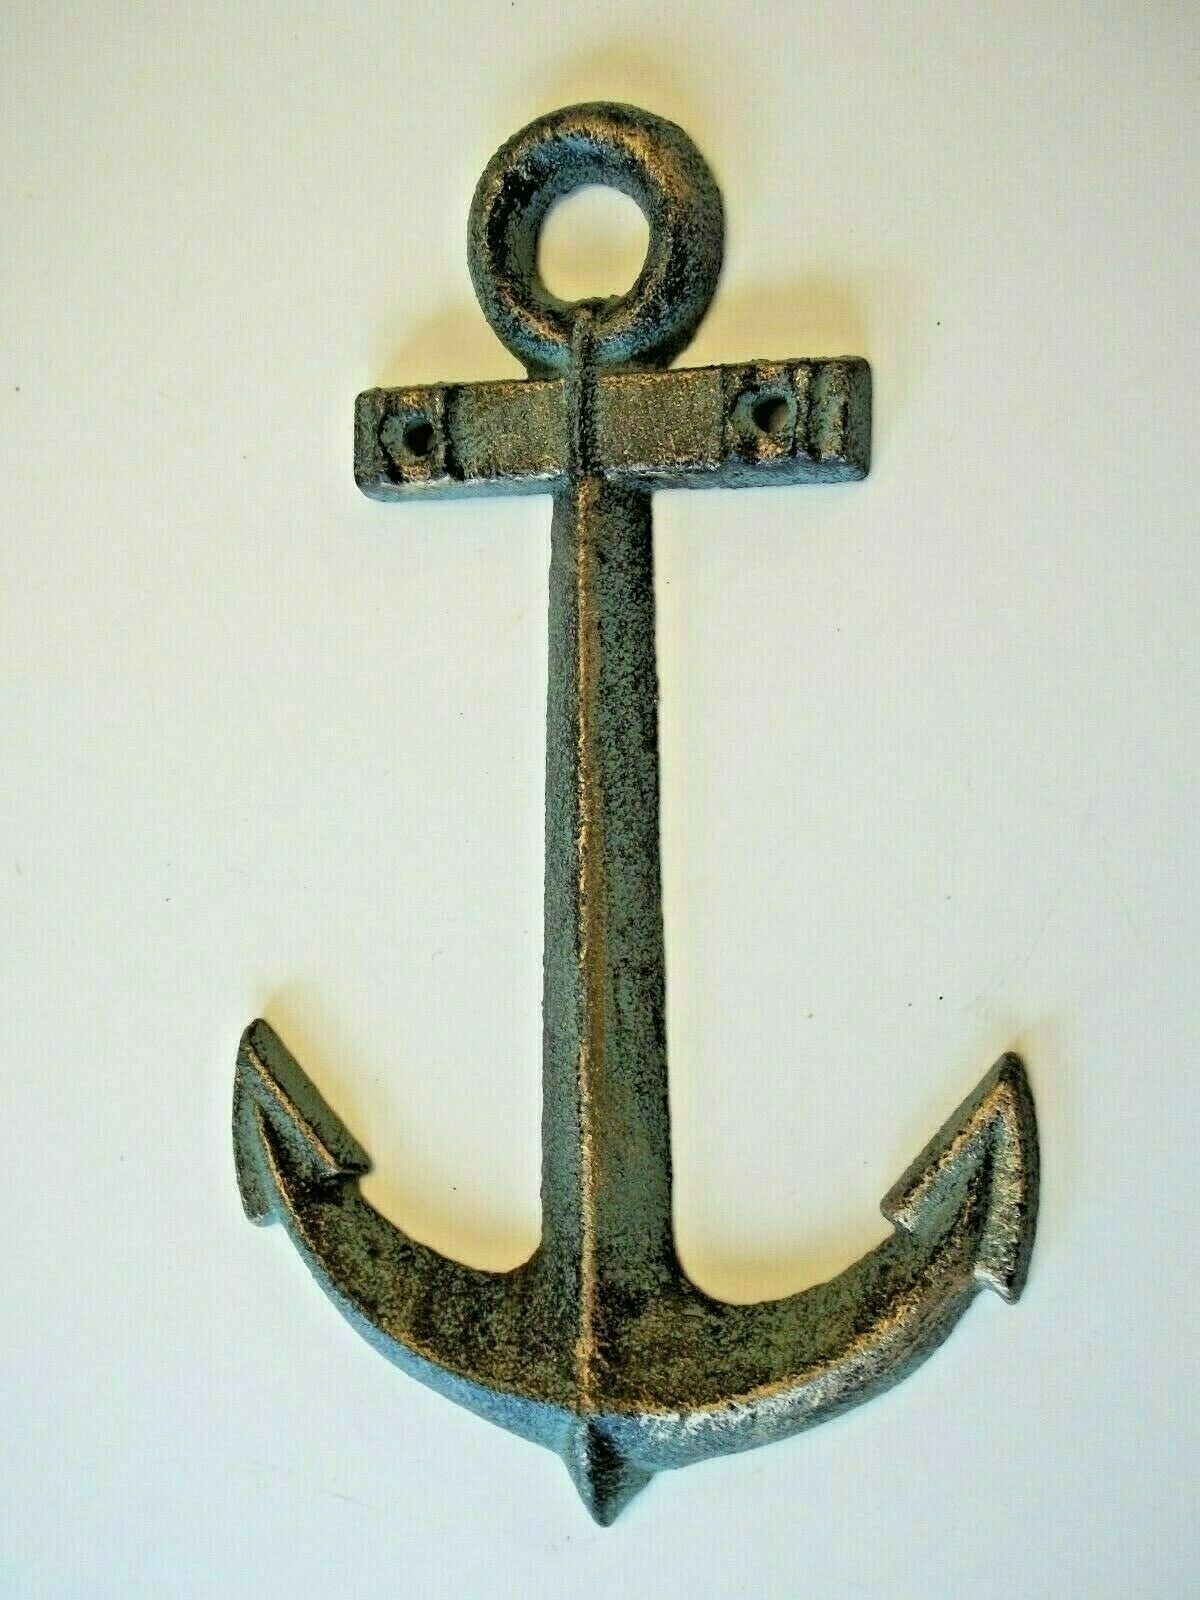 Cast Iron Nautical Boat Anchor Wall Decor Brass/ Blue Green Aged Patina Colors